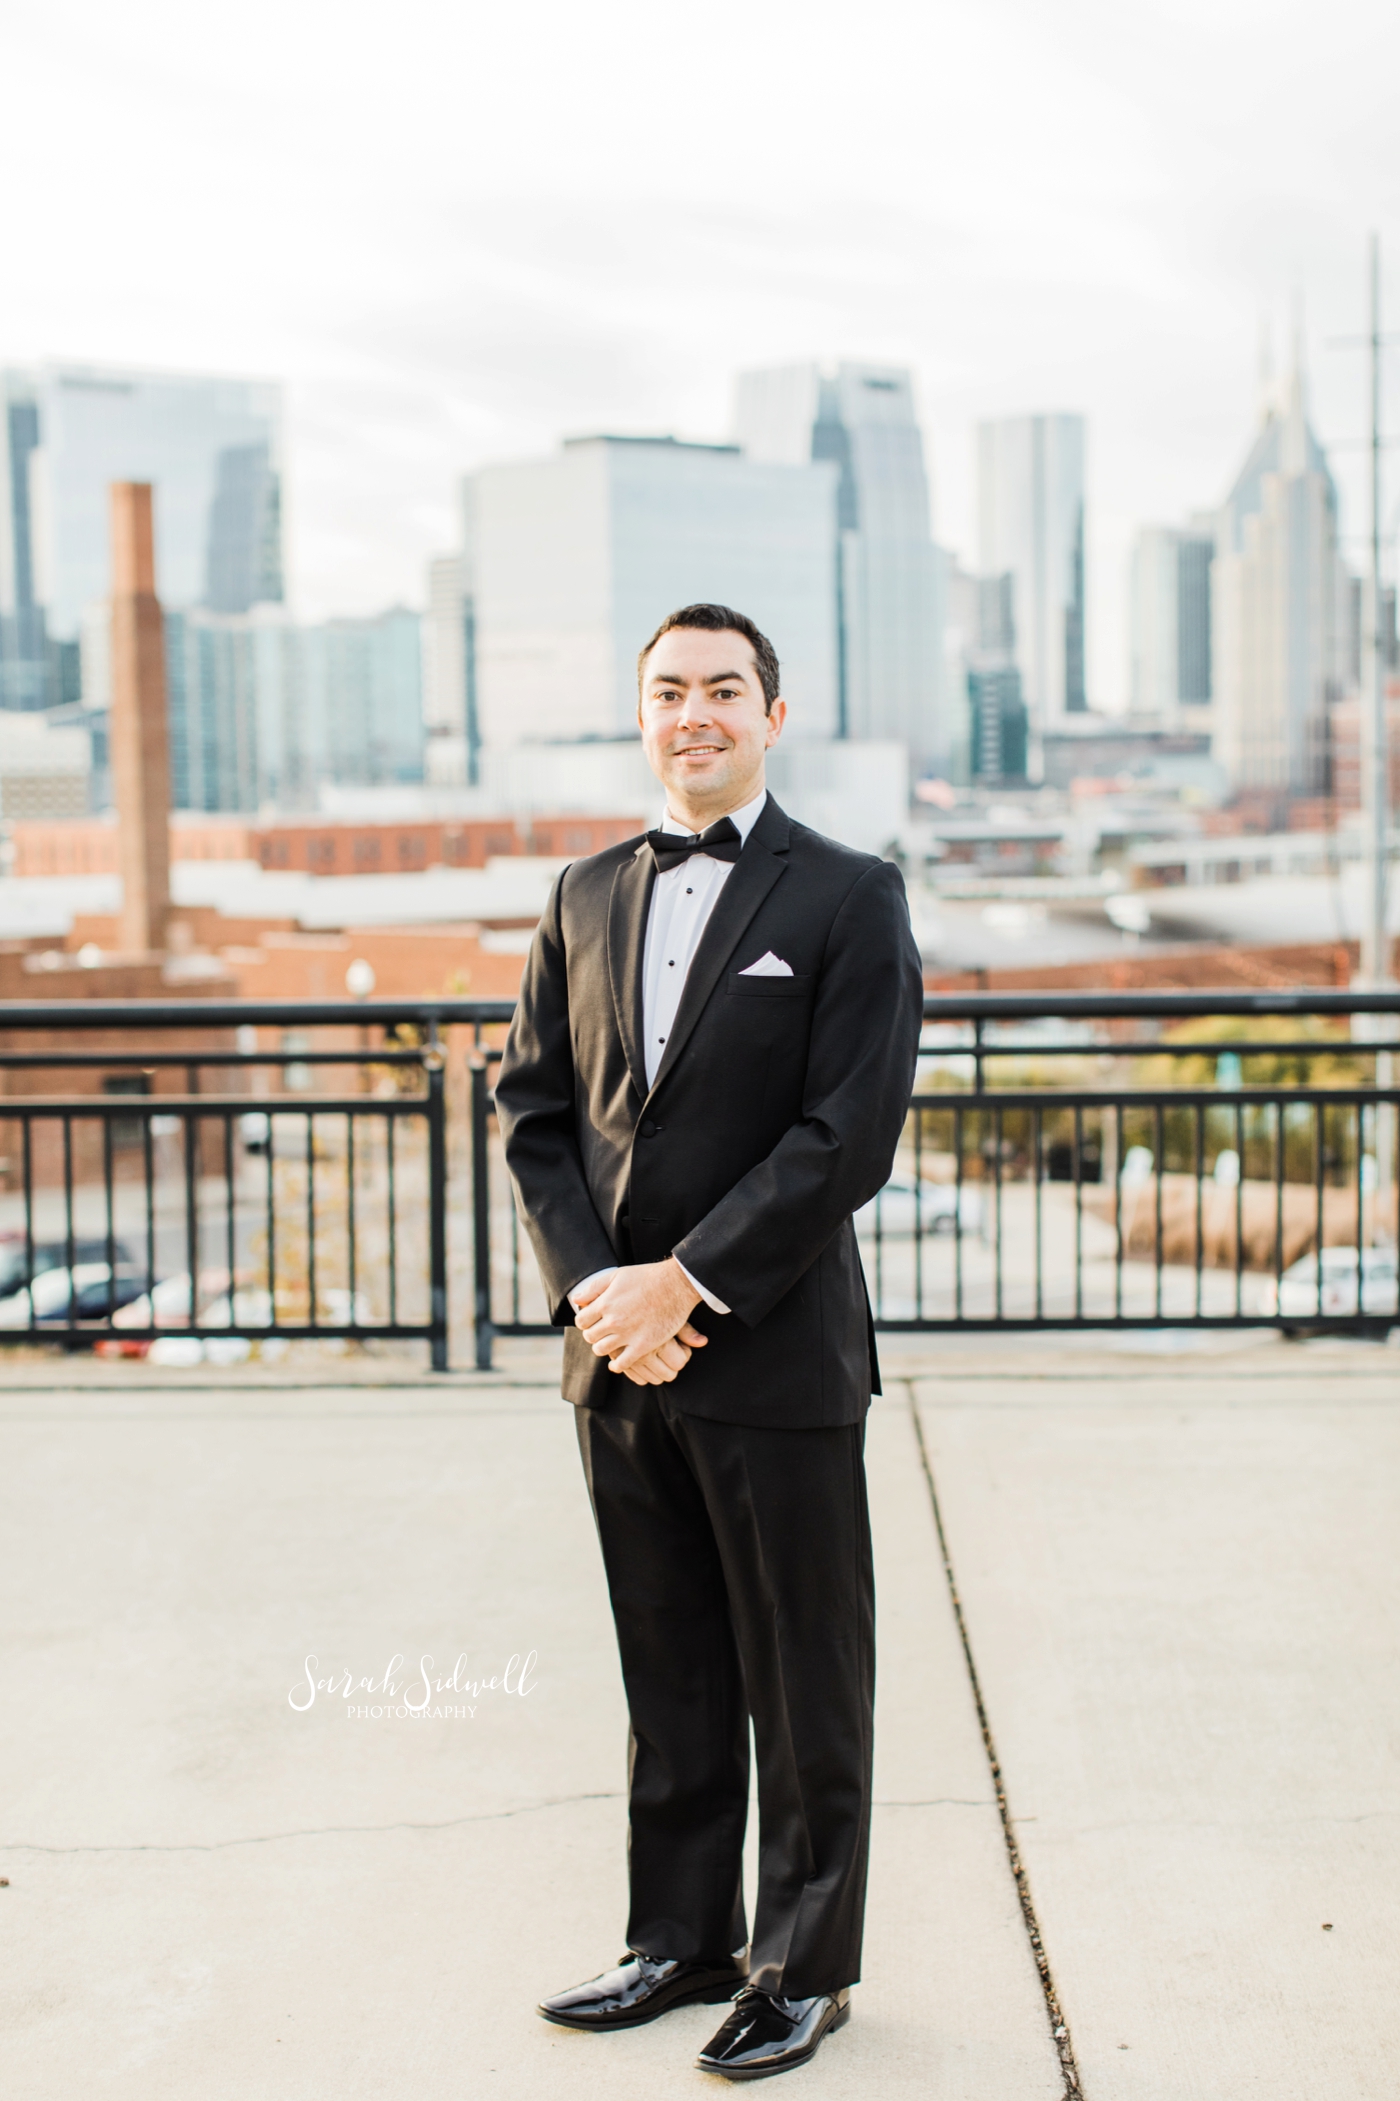 A man stands on a rooftop | Sarah Sidwell Photography | The Bell Tower